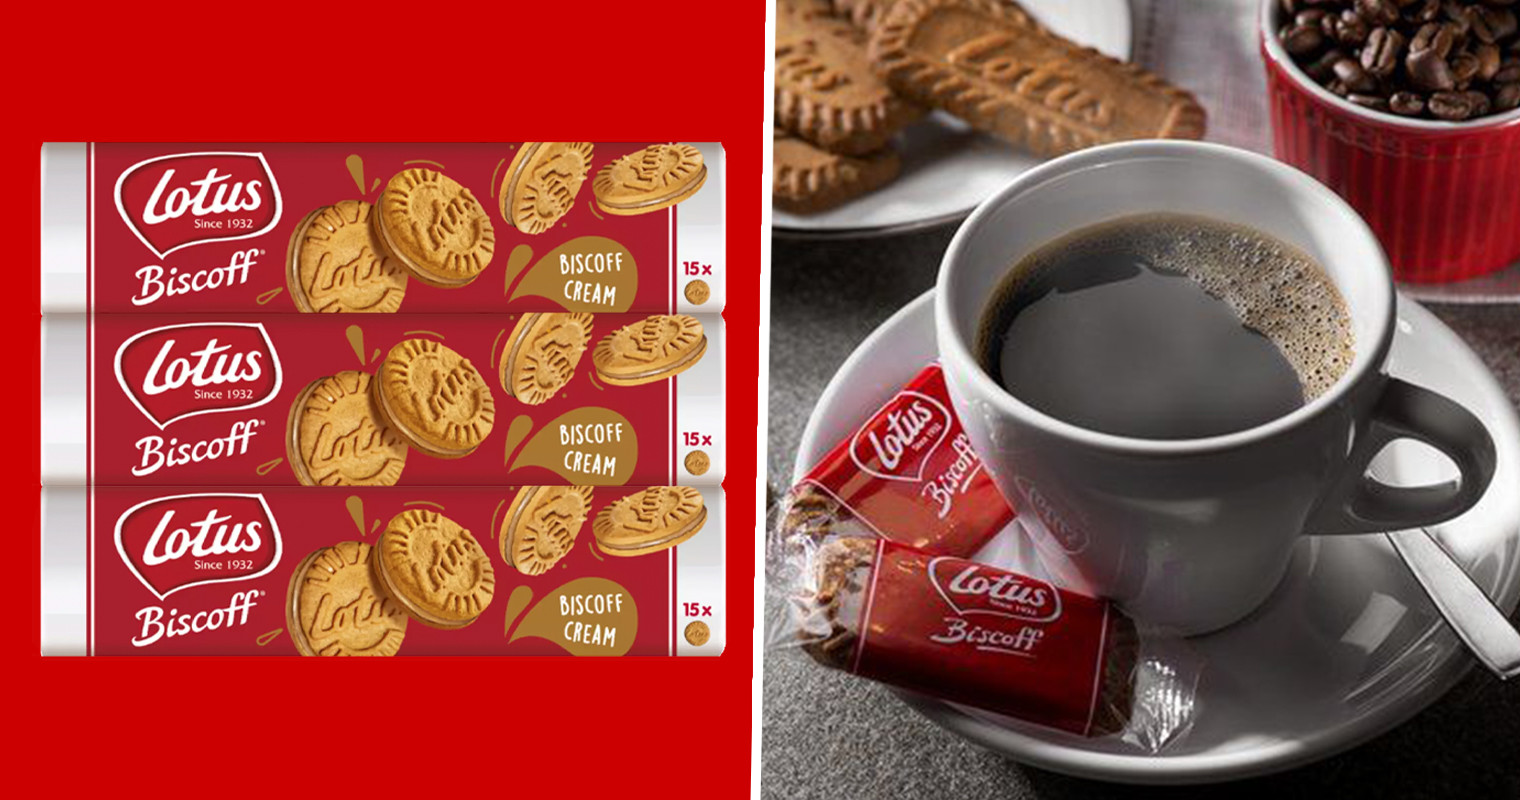 Lotus Biscoff has just released a cream sandwich biscuit ...